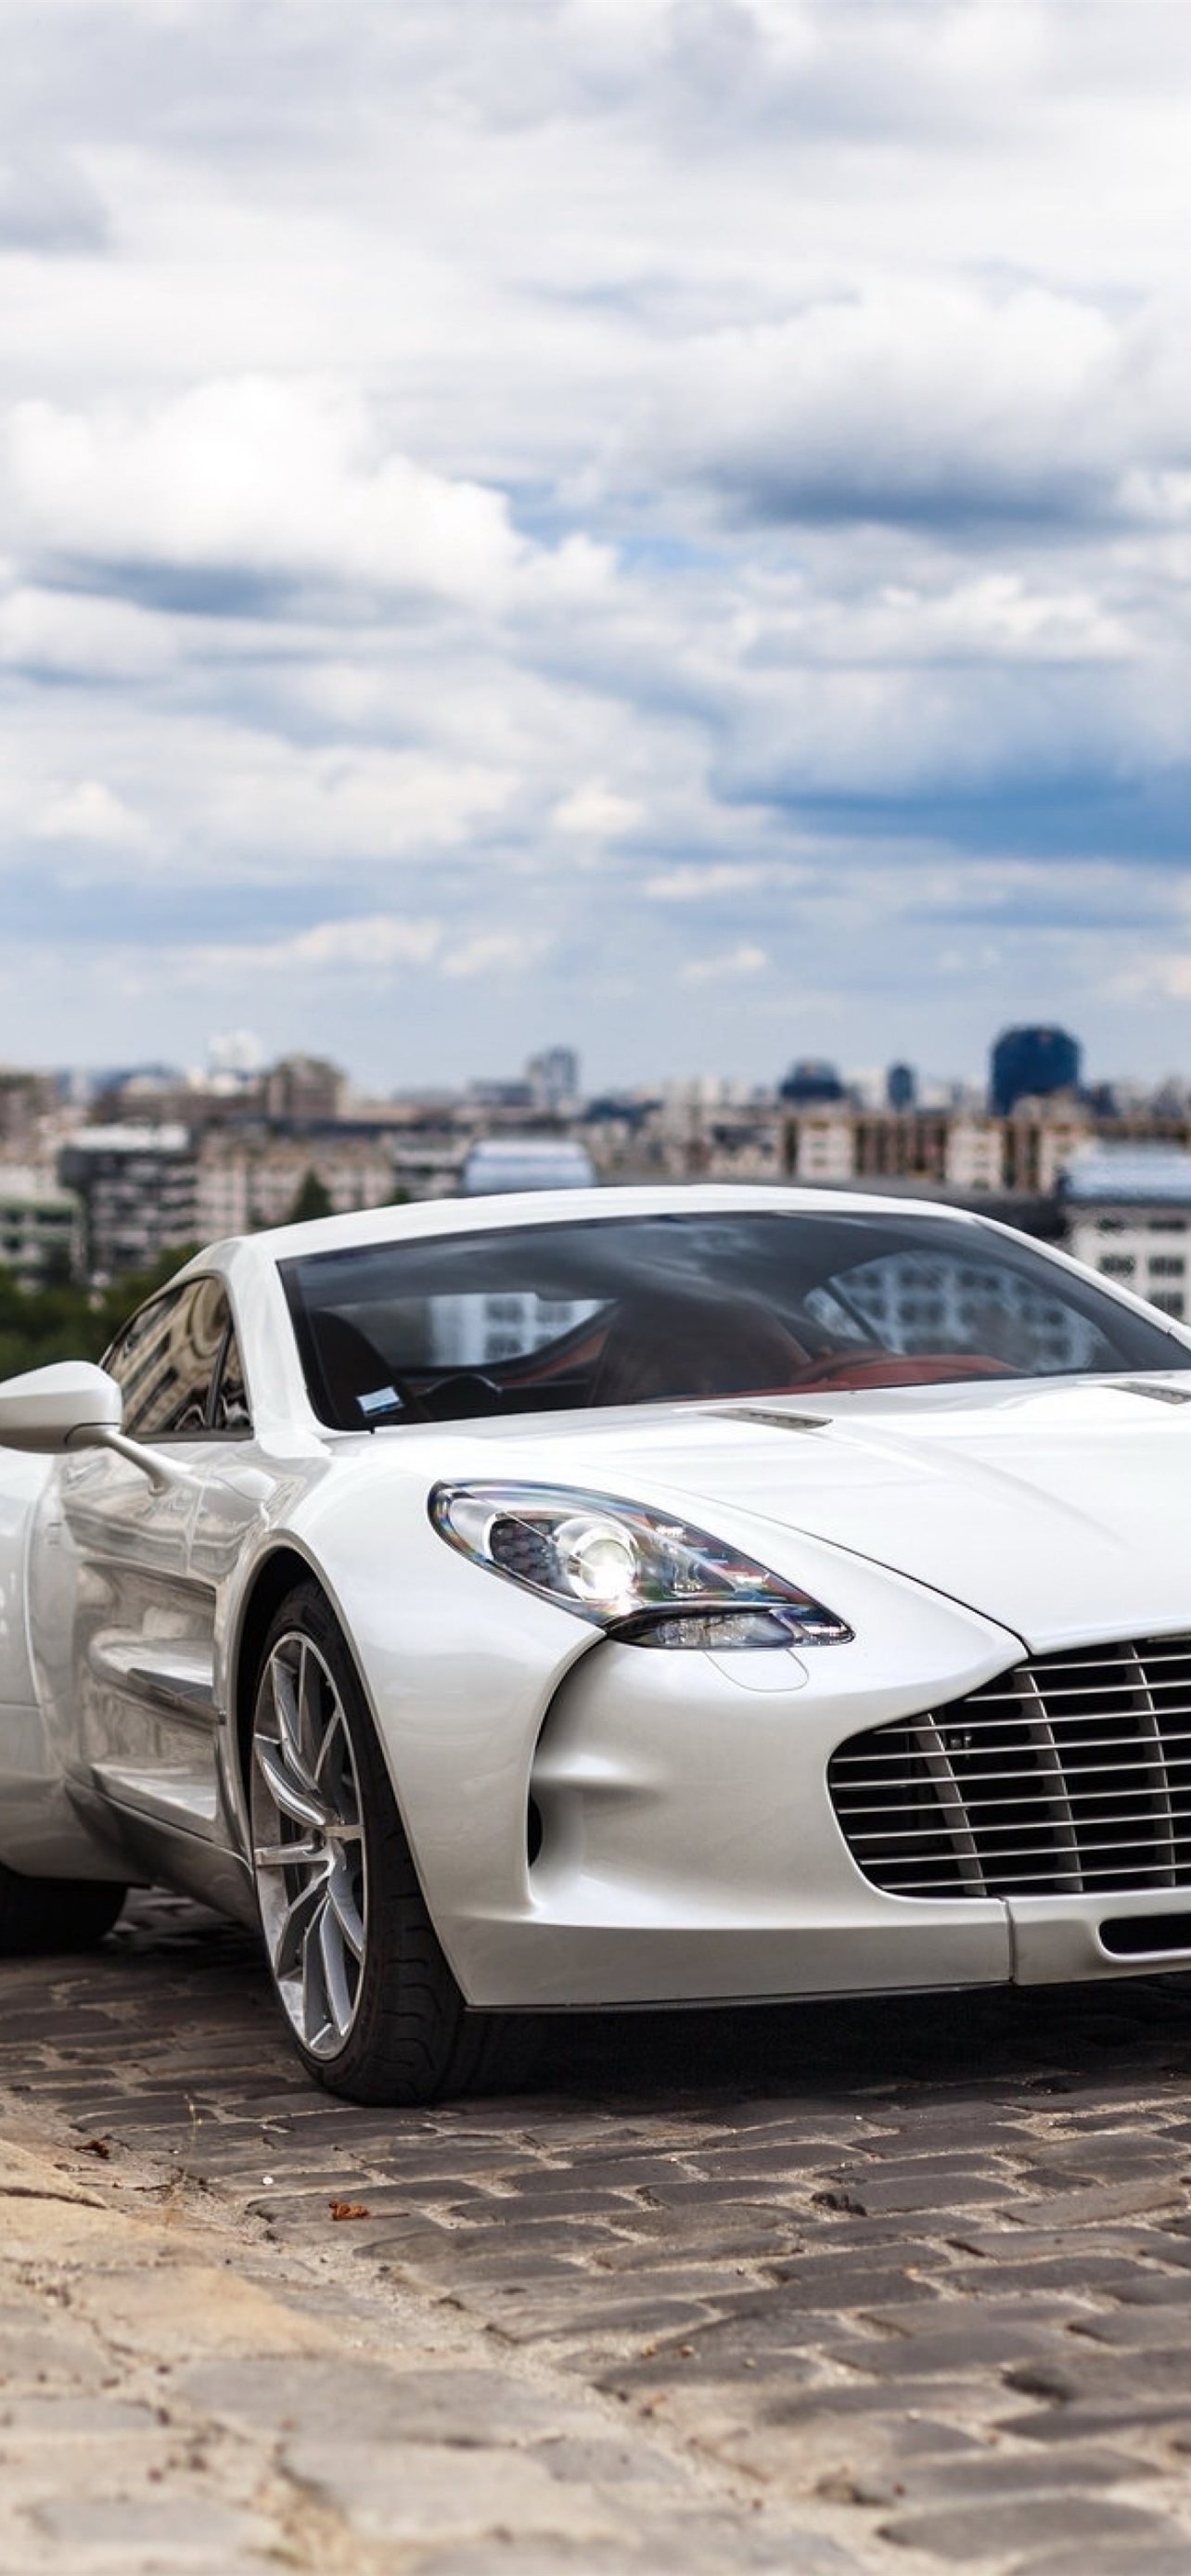 Aston Martin One-77, iPhone wallpapers, High definition, Luxury sports car, 1290x2780 HD Handy